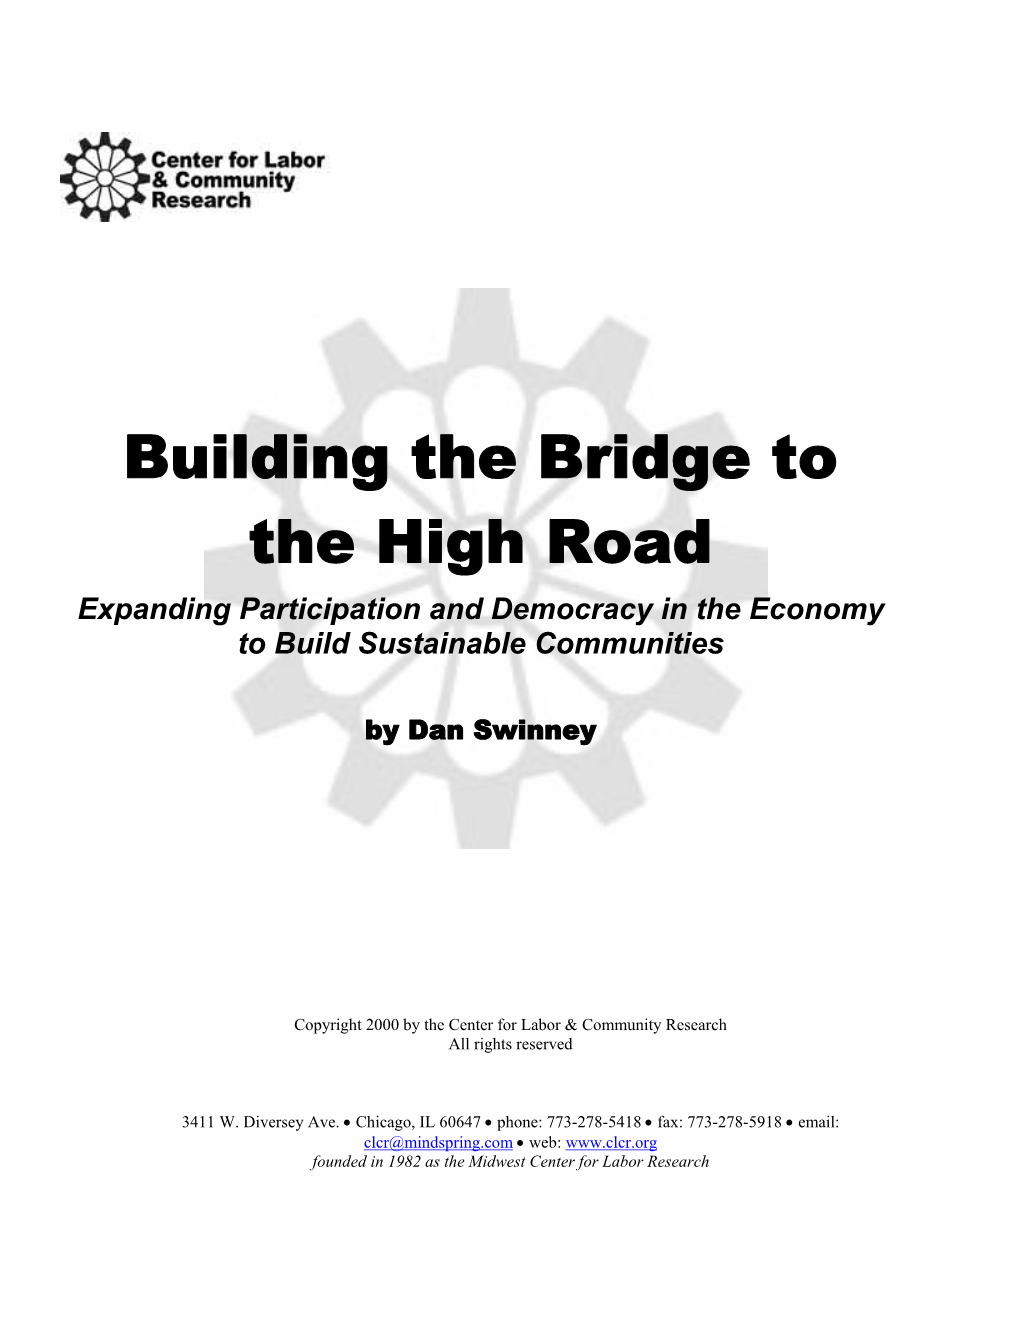 Building the Bridge to the High Road Expanding Participation and Democracy in the Economy to Build Sustainable Communities